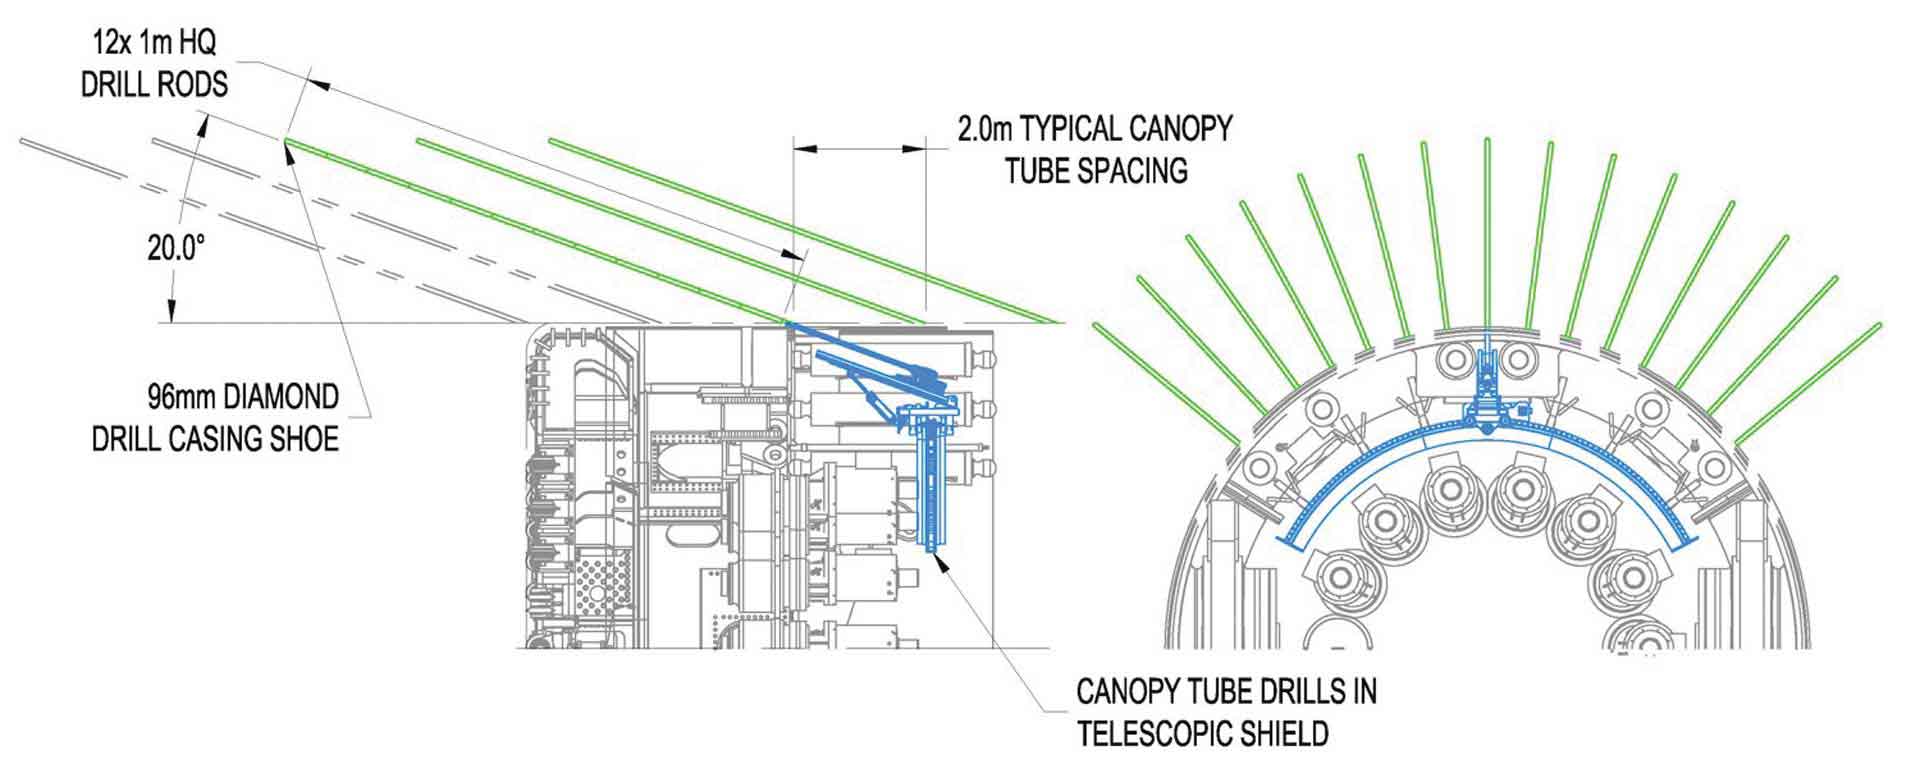 typical canopy tube spacing to stabilize ground above the TBM